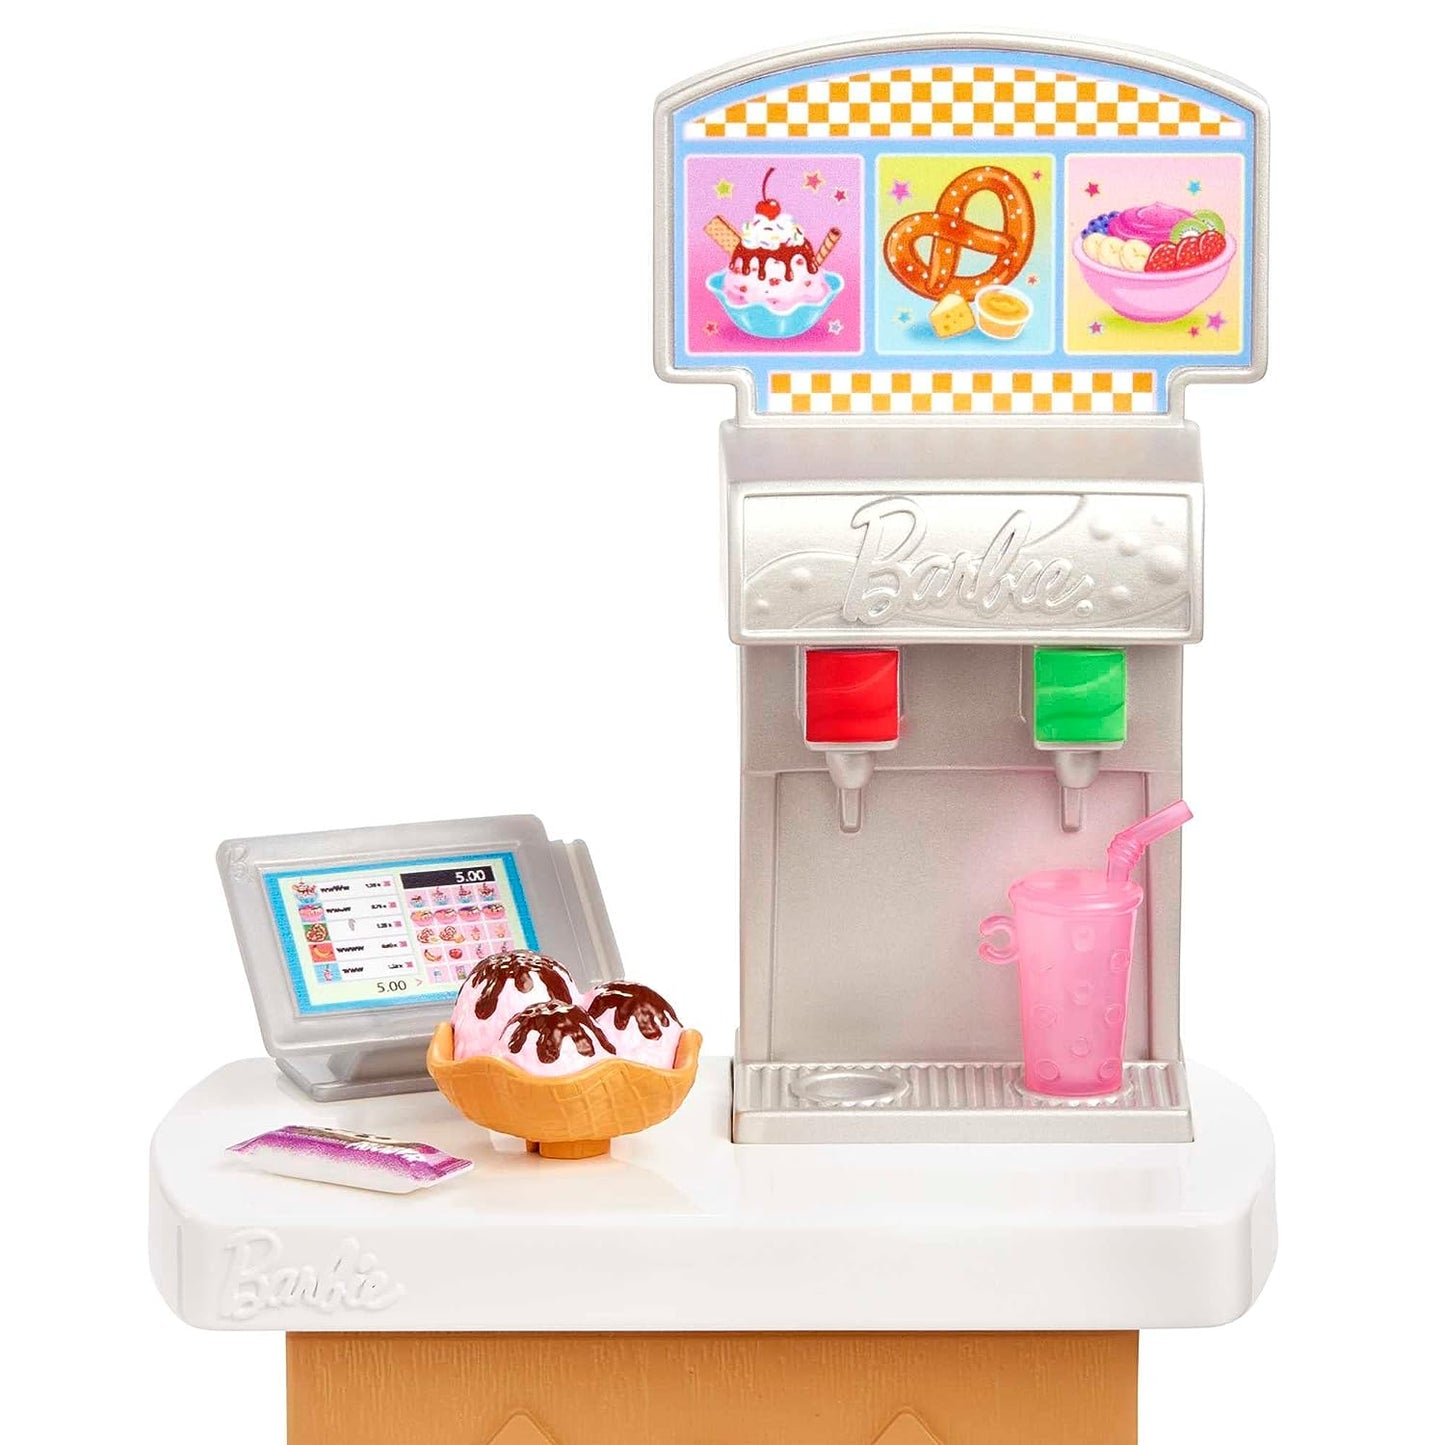 Barbie Toys: Skipper Doll & Snack Bar Playset HKD79 - Color-Change Sundae with 8 Additional Accessories, Multicolor